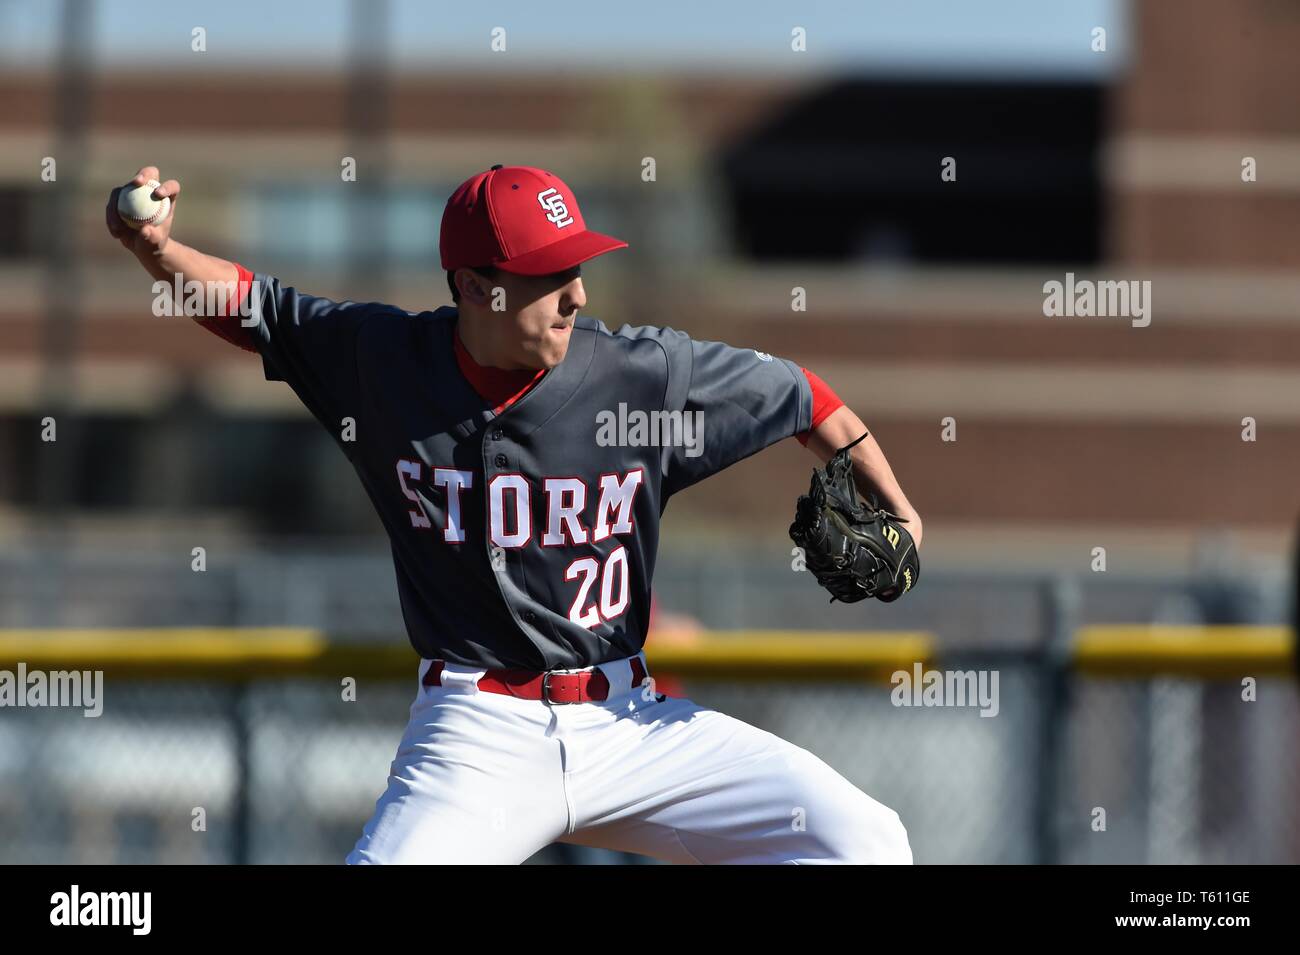 Pitcher delivering a pitch to a waiting opposing hitter. USA. Stock Photo